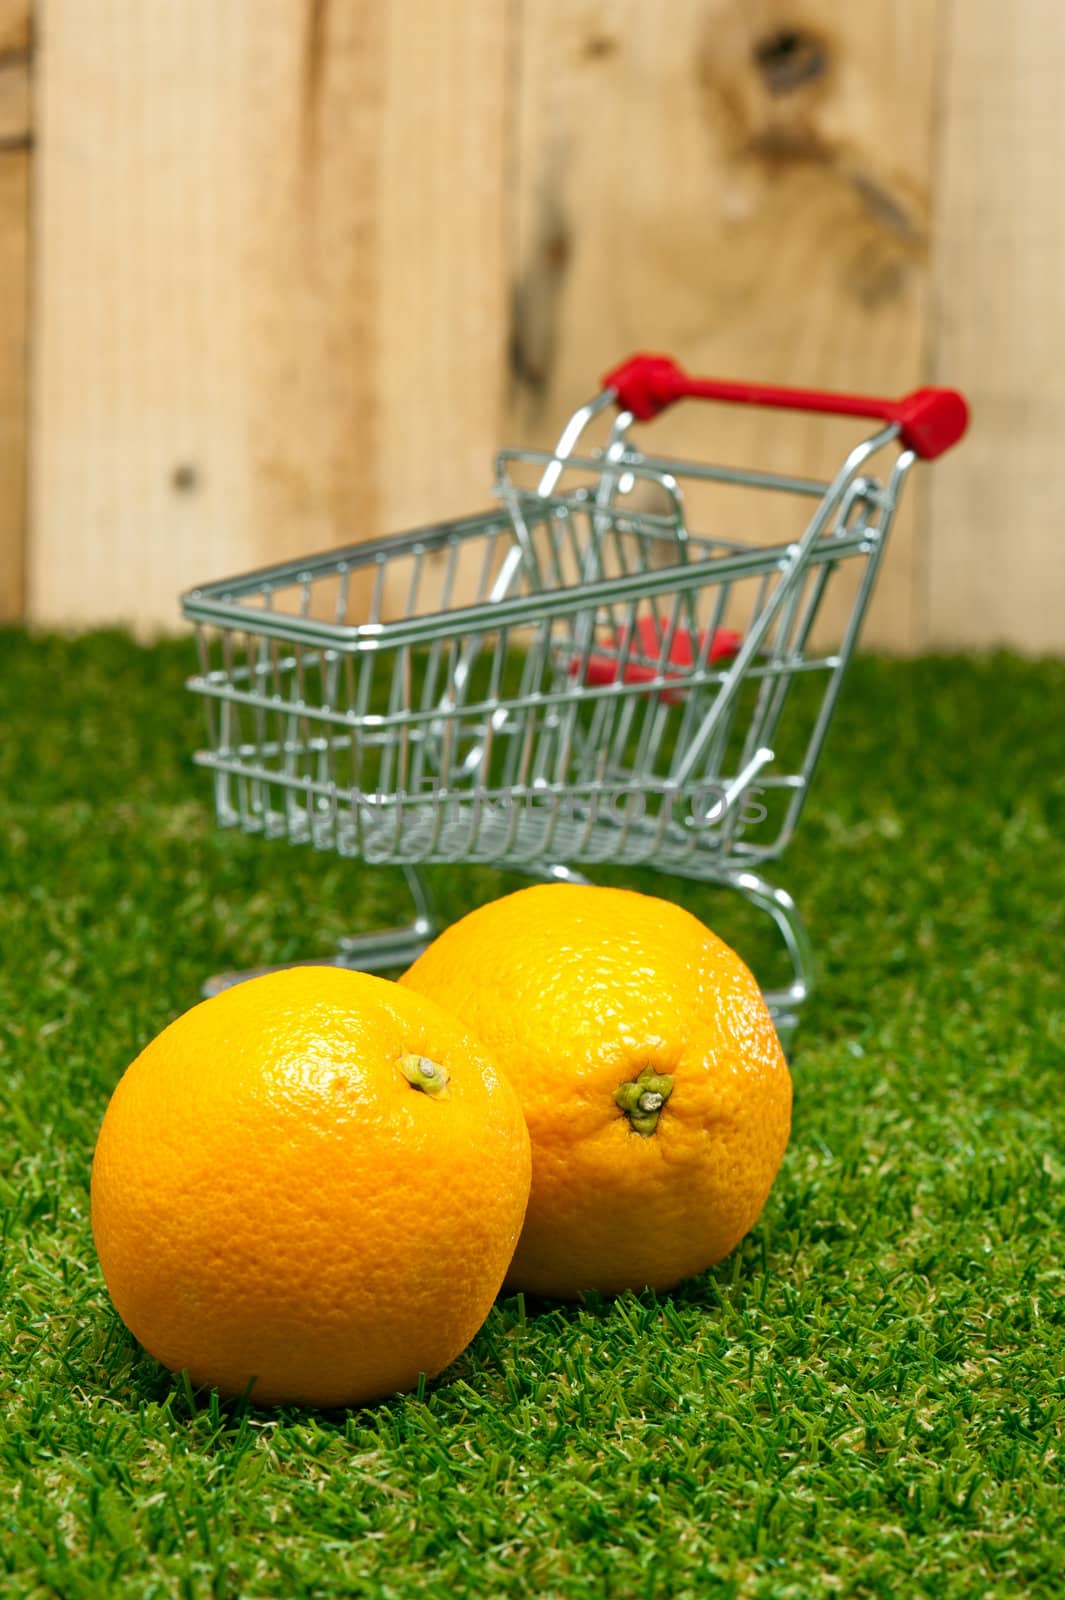 Orange fruit on lawn with shopping cart in front of wooden wall